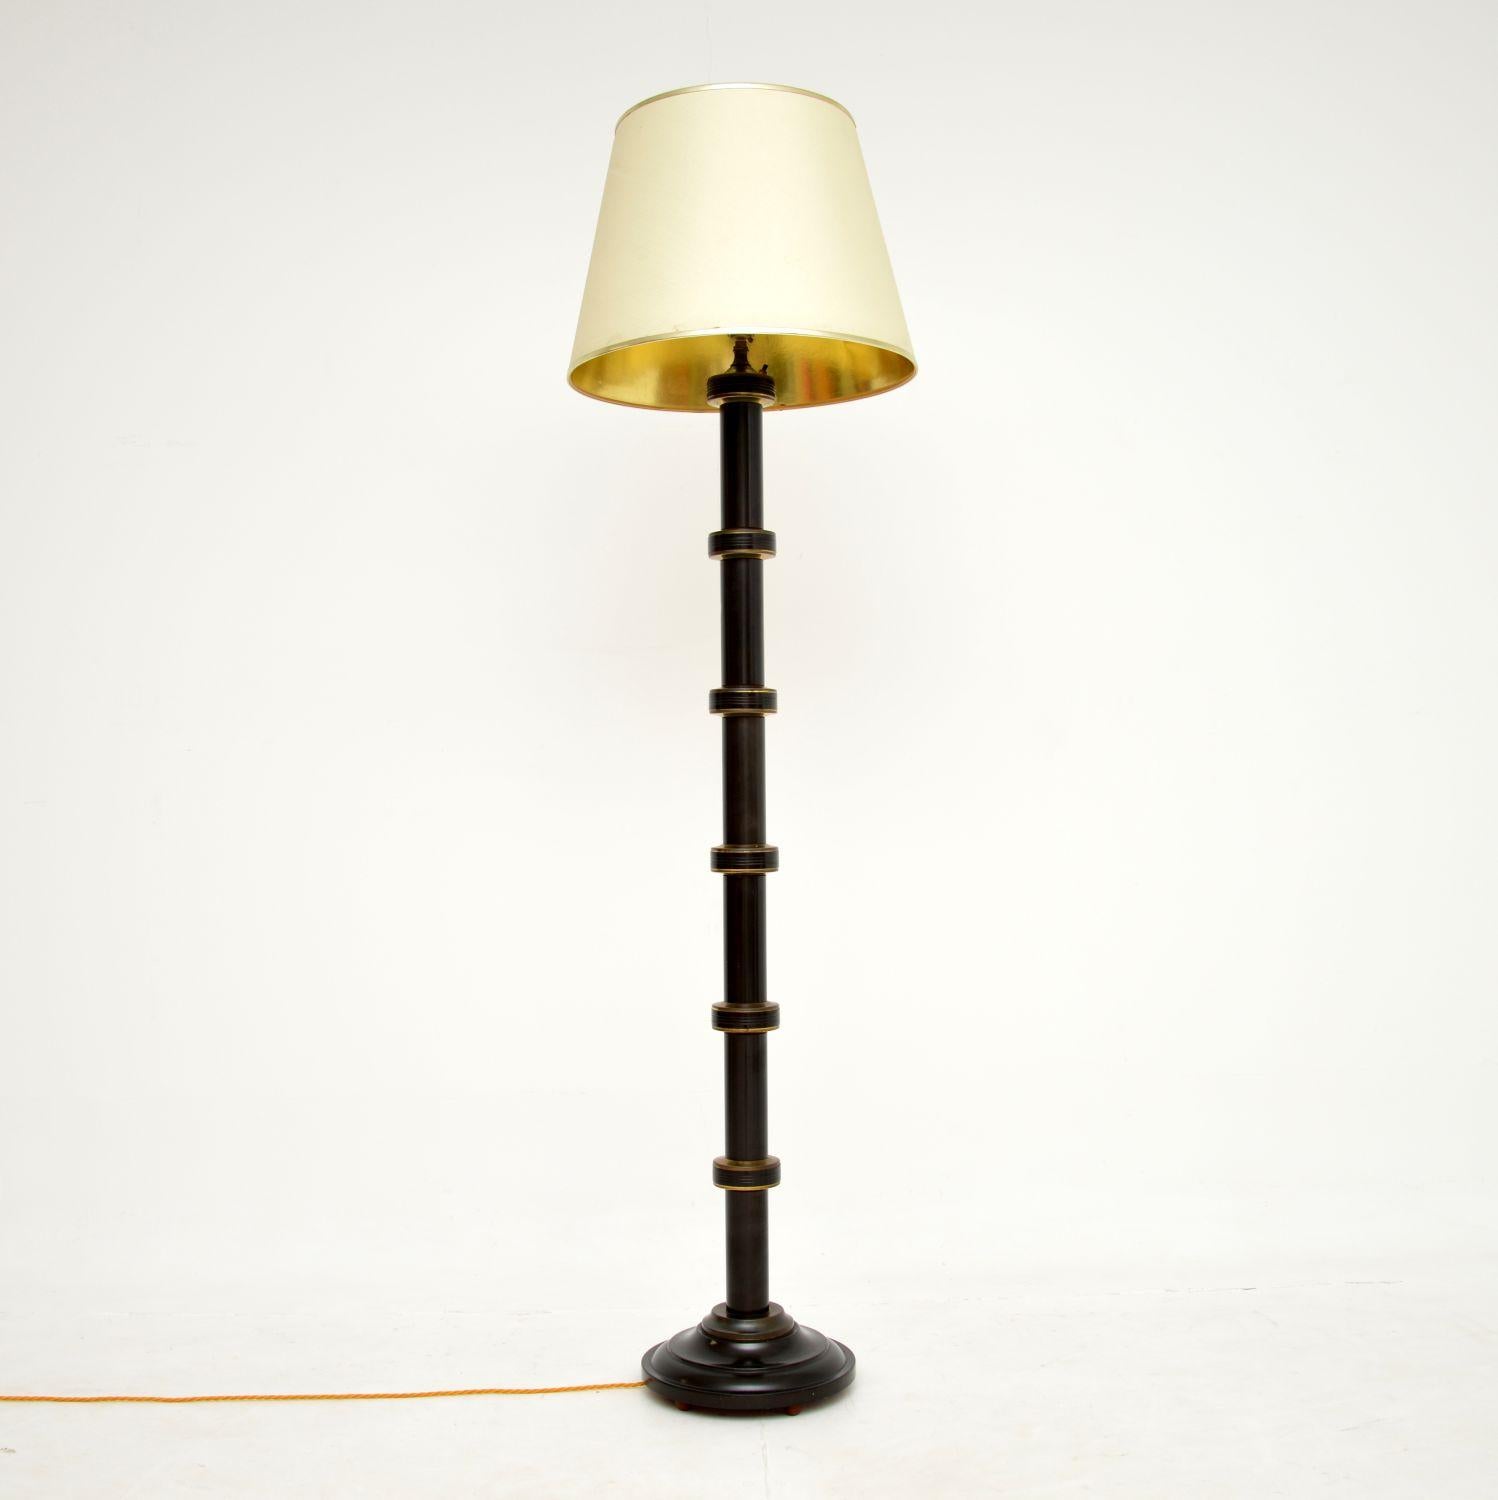 A superb vintage floor lamp in enamelled metal and brass, made in England and dating from around the 1970’s.

It is of amazing quality, it is very sturdy and heavy, the condition is excellent with just some minor surface wear. The shade is